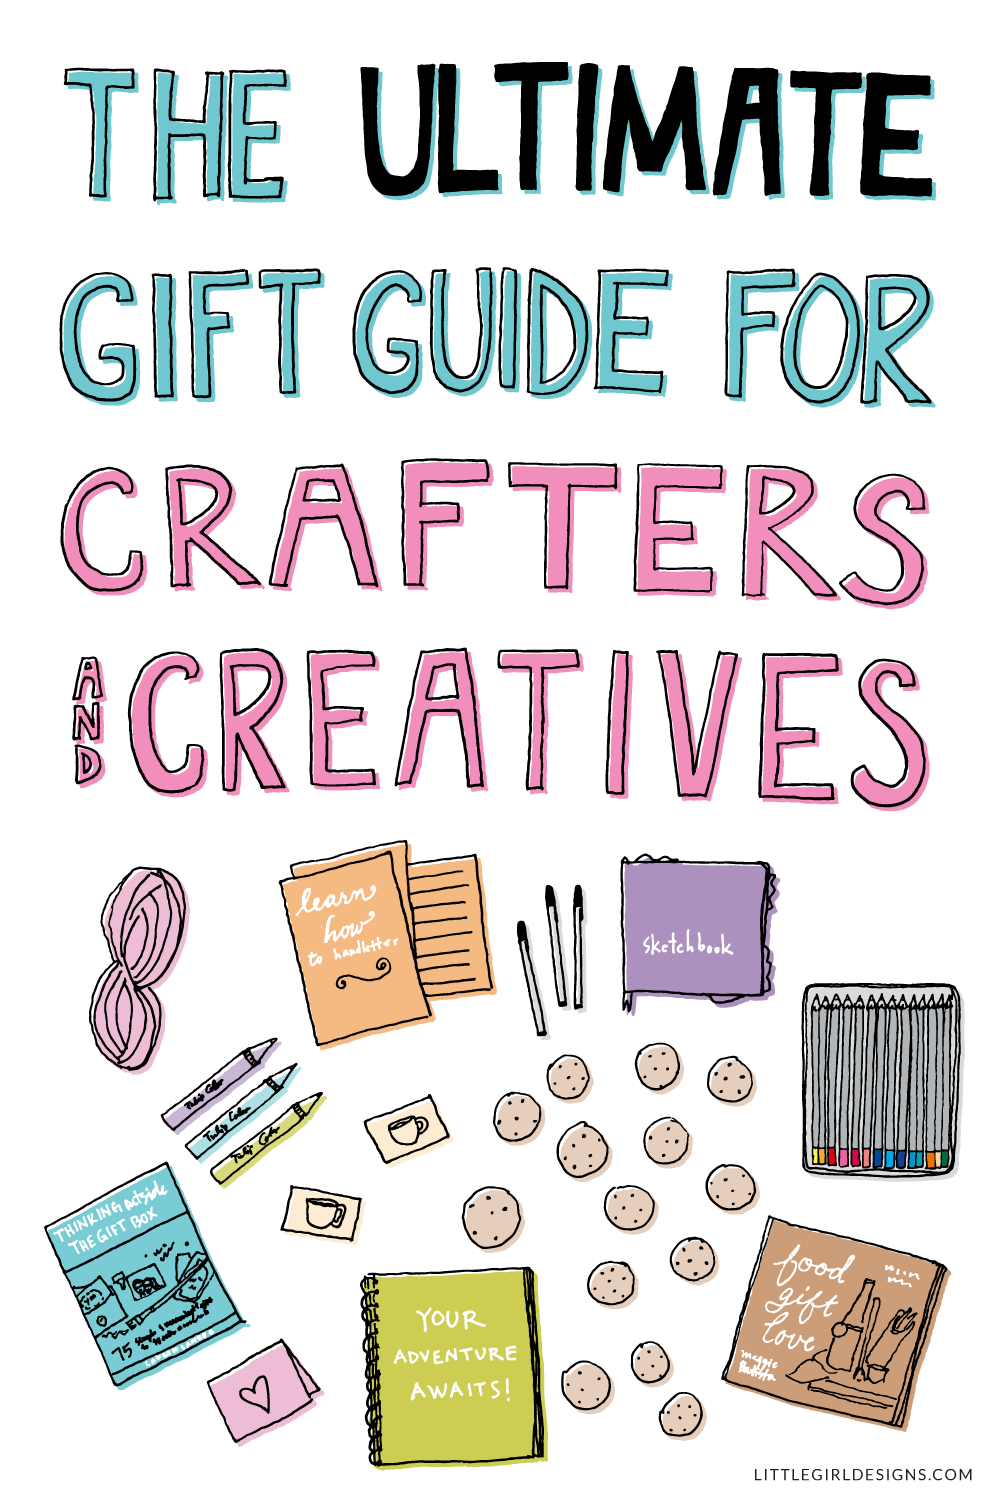 The Ultimate Gift Guide for Crafters and Creatives - Looking for a great (and meaninful) gift for the creative person in your life? Look no further! Here's a guide suitable for crafters, art journalers, DIYers, designers, wanna-be artists, and probably you, too! Great ideas for Christmas, birthdays, and just-because gifts. #artjournal #giftguide #Christmasgifts